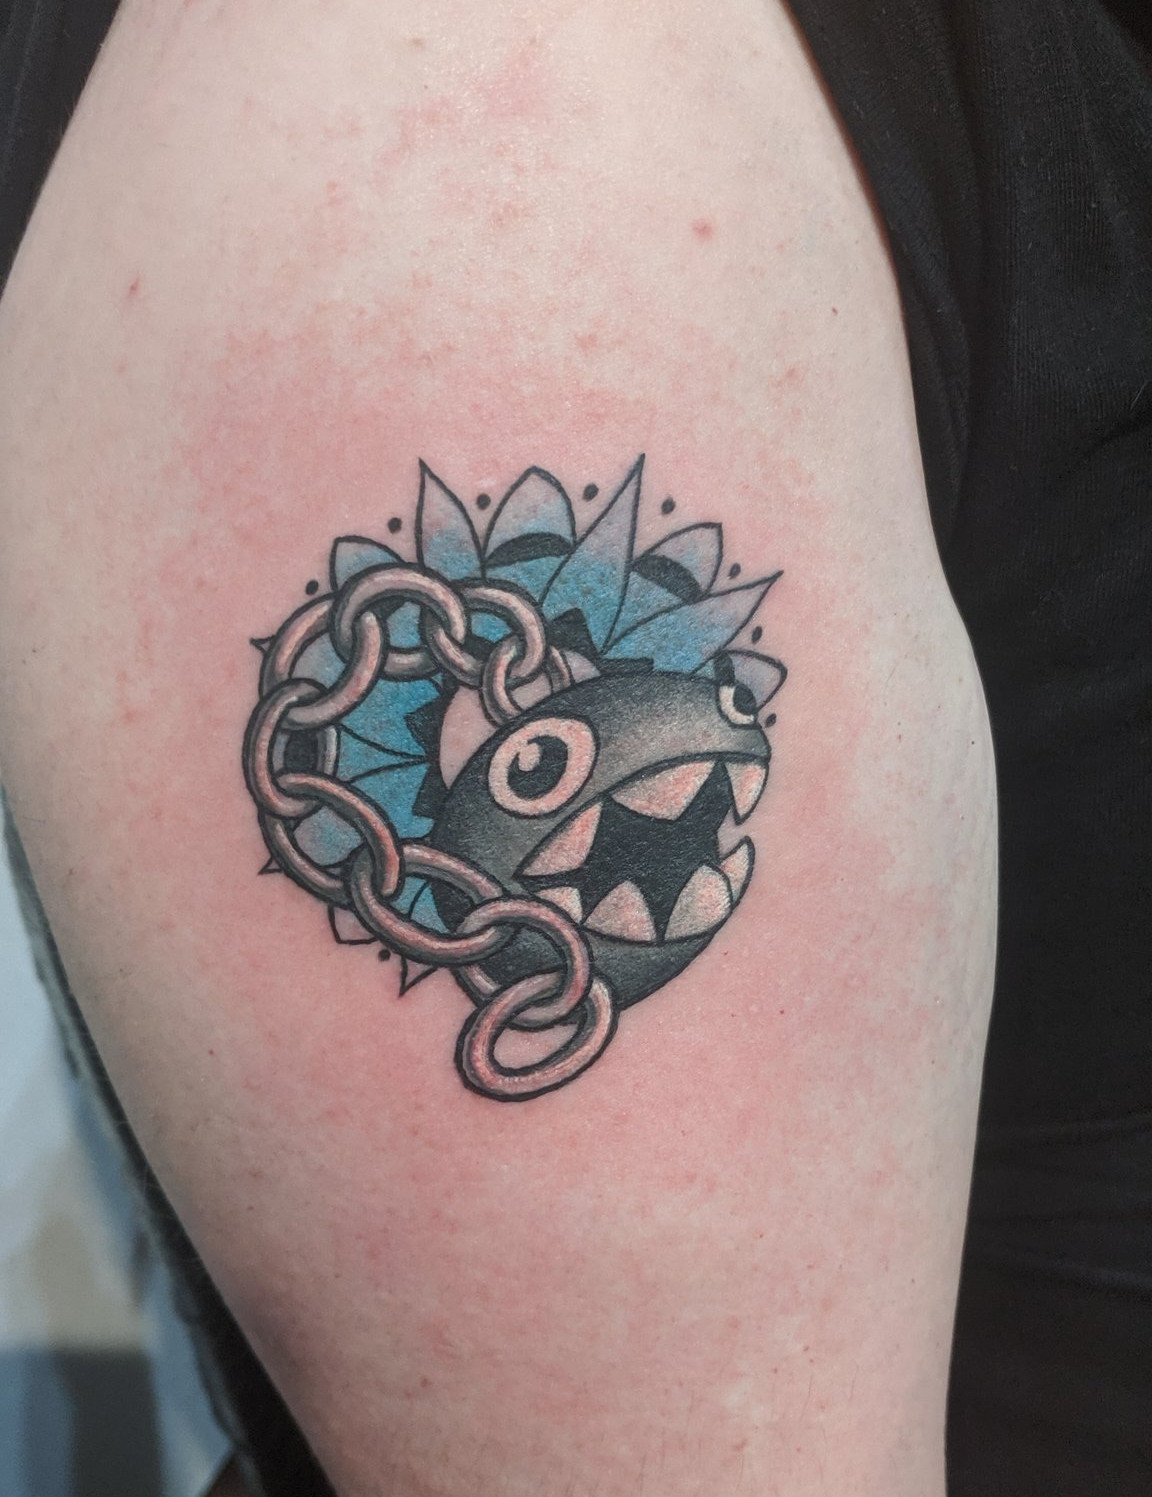 A photo of Squidge’s tattoo, located on his upper right arm. The tattoo consists of a chain-chomp from the Super Mario universe,on an explosive teal background.